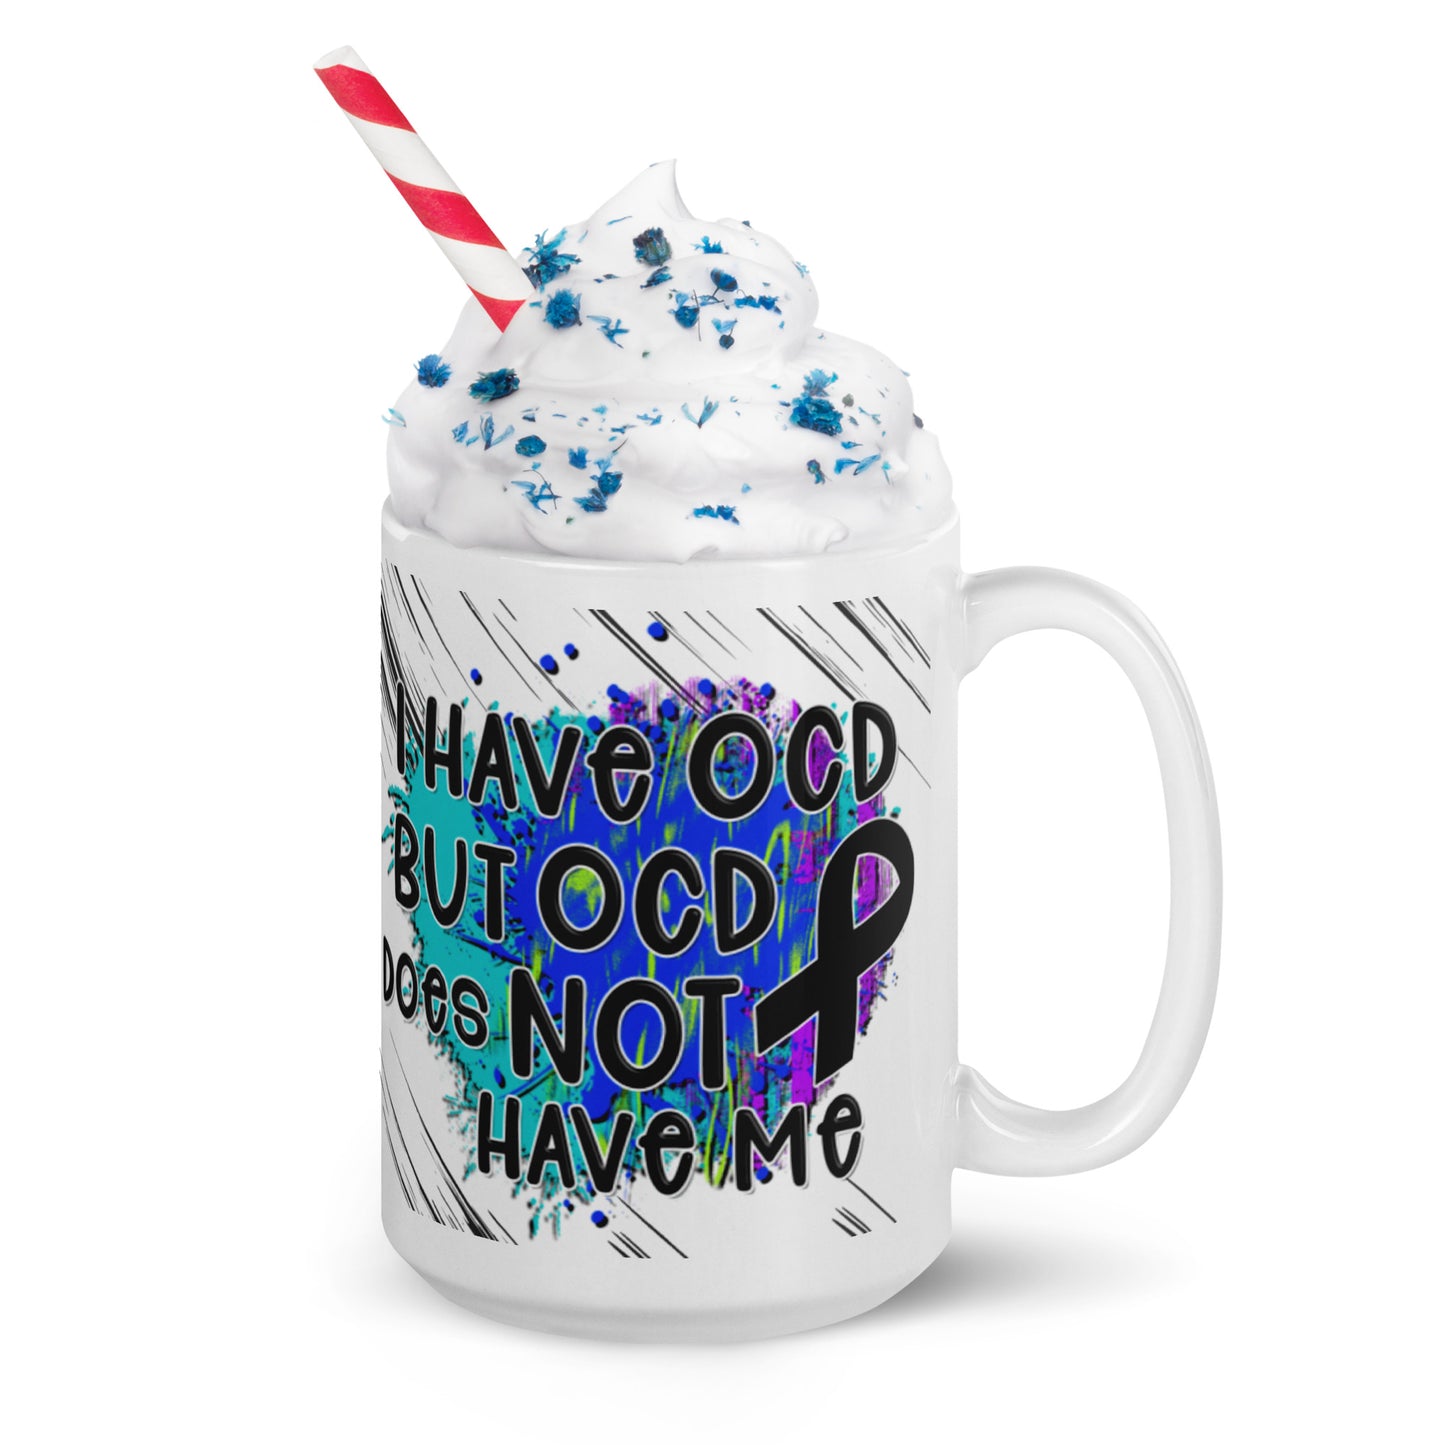 I HAVE OCD BUT OCD DOESN'T HAVE ME- White glossy mug